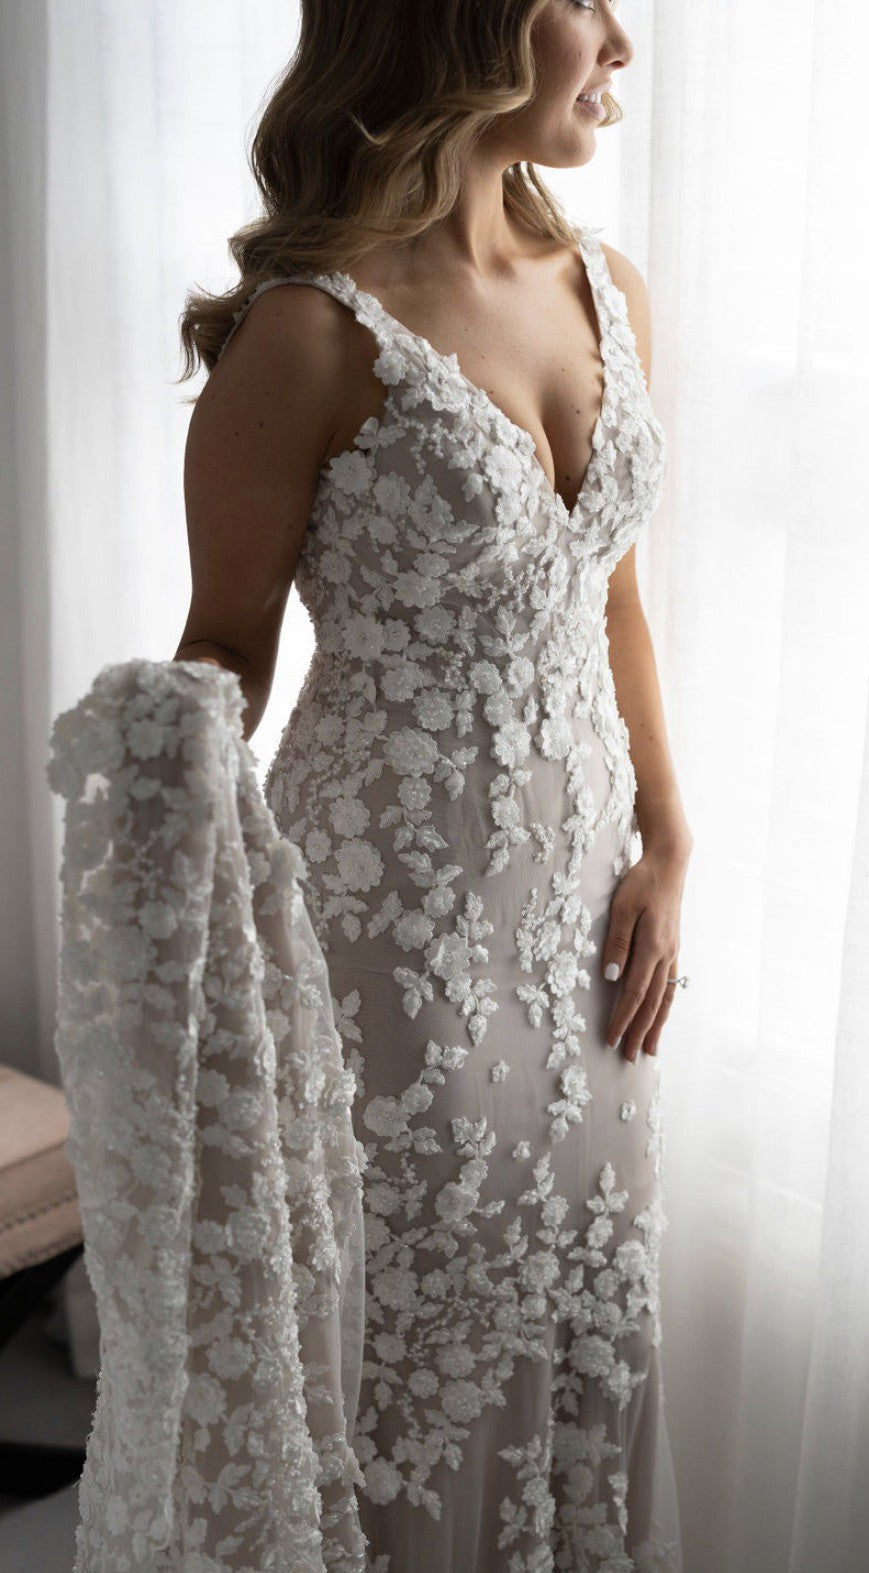 C2024-VN44F - sleeveless v-neck wedding gown with 3D embroidered embellishments